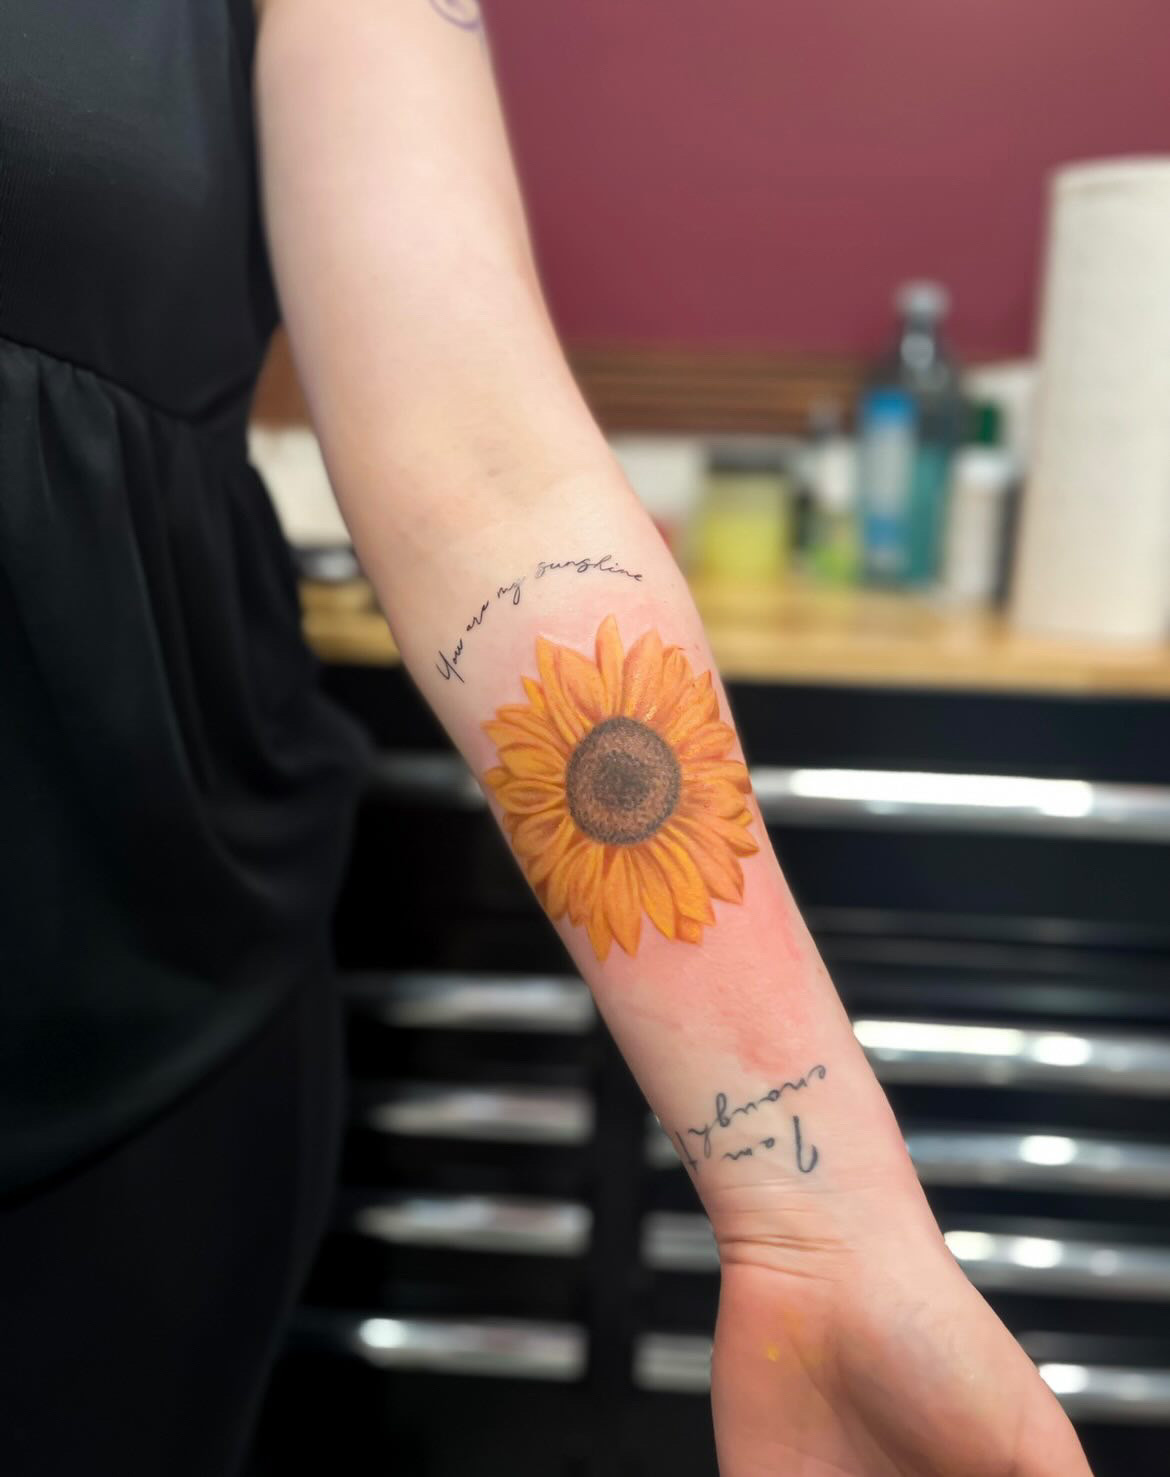 Full color forearm tattoo of a sunflower by tattoo artist Alessandra Clivio.